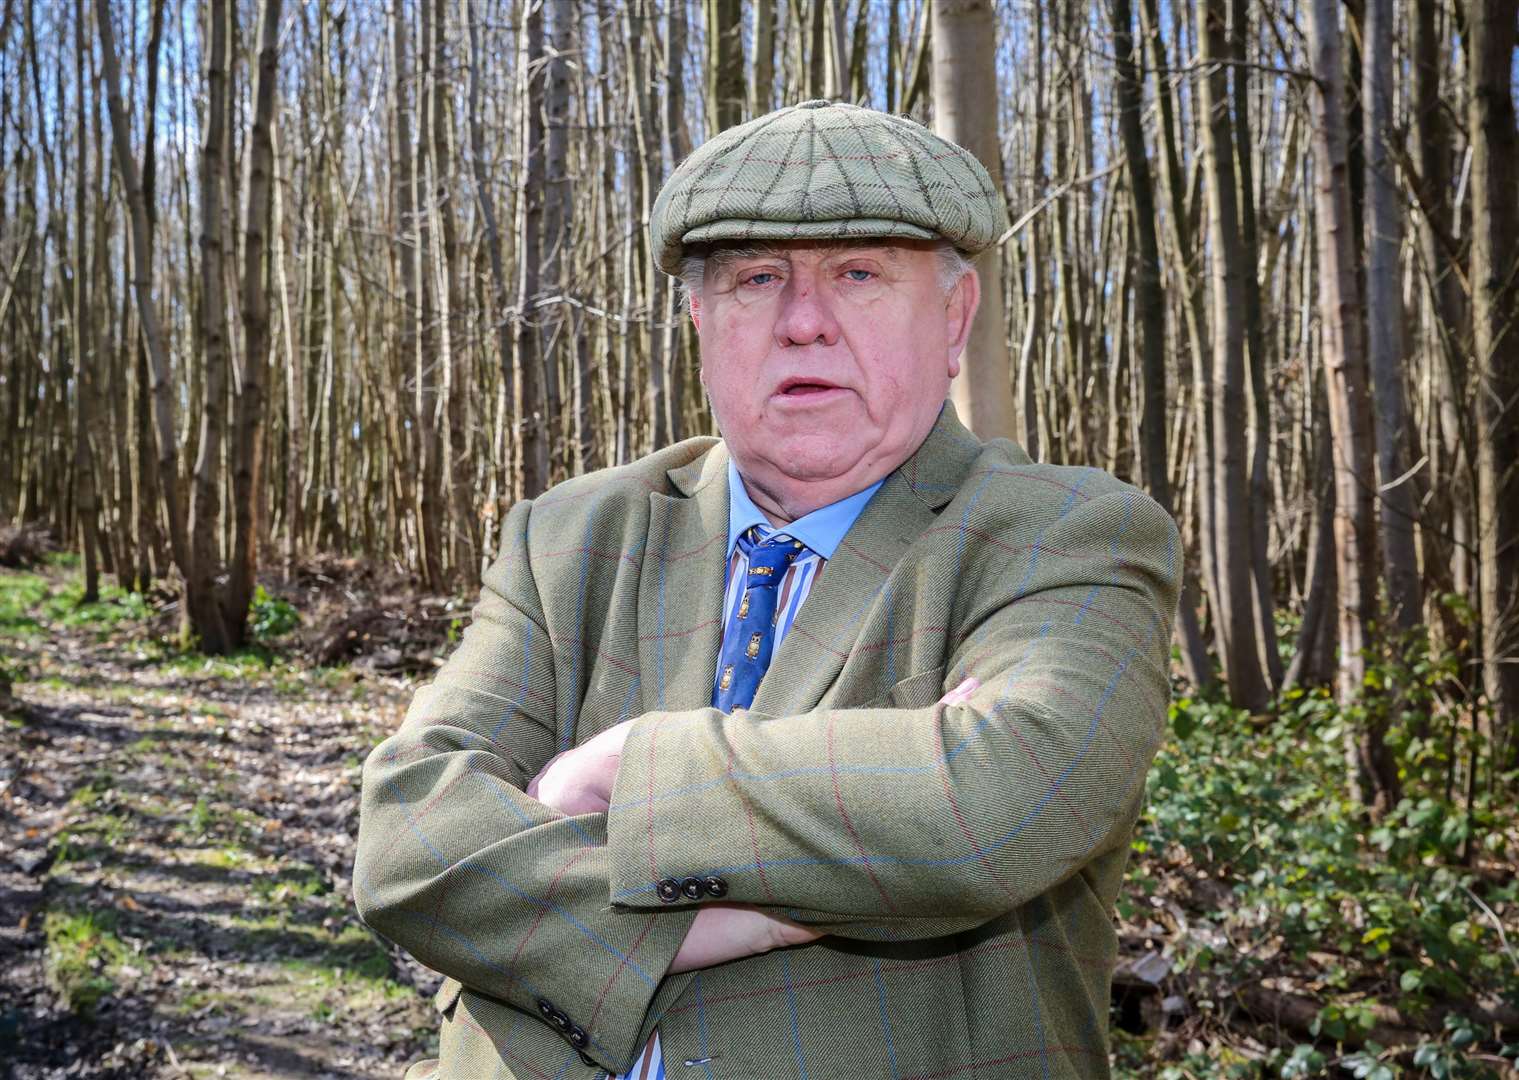 Fergus Wilson has been ordered to pay costs after being slapped with a permanent injunction for harassing Ashford Borough Council employees. Picture: Matthew Walker.